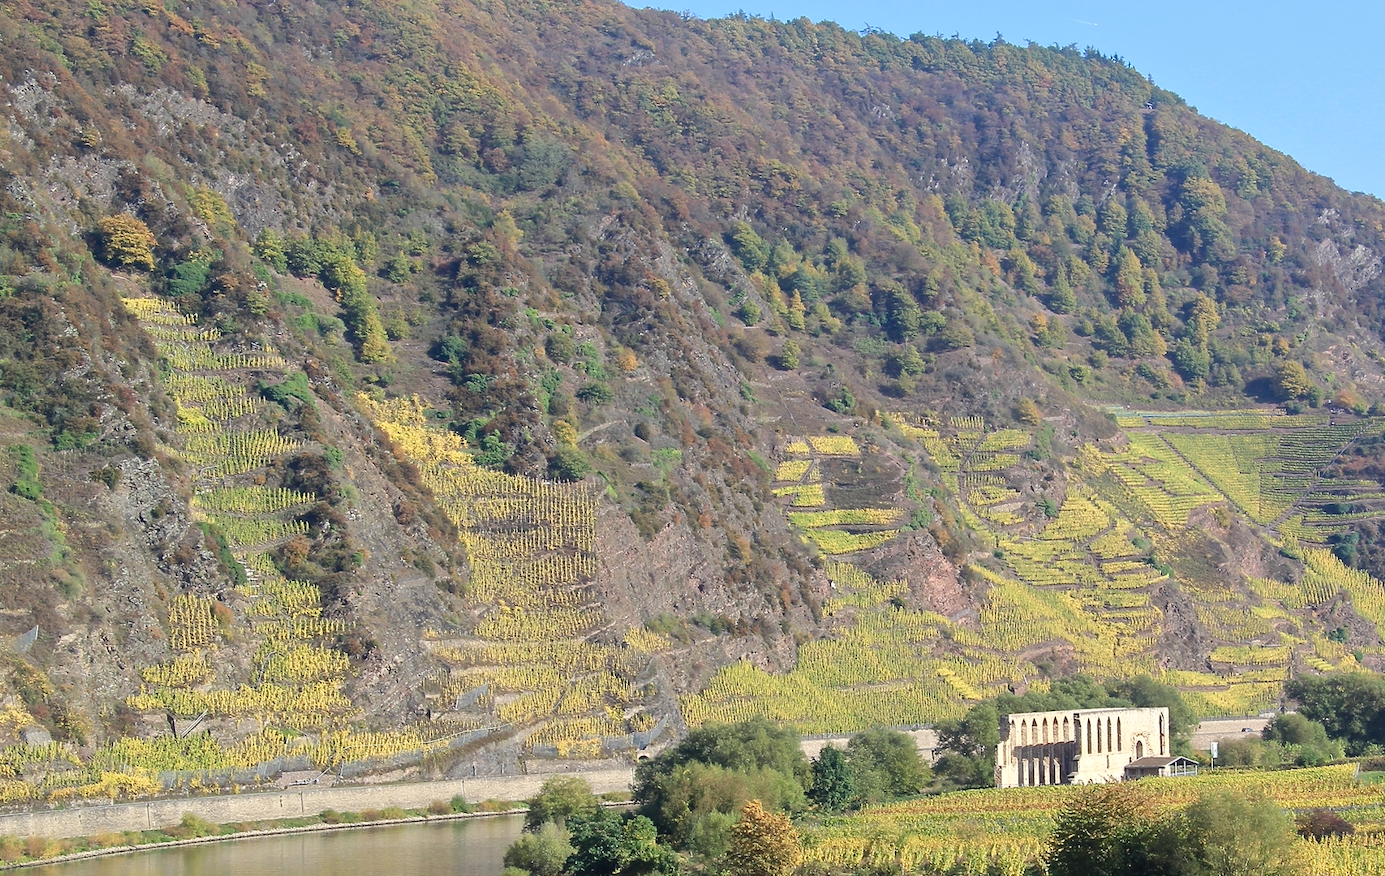 Steep vineyard terraces rise above the Mosel river.